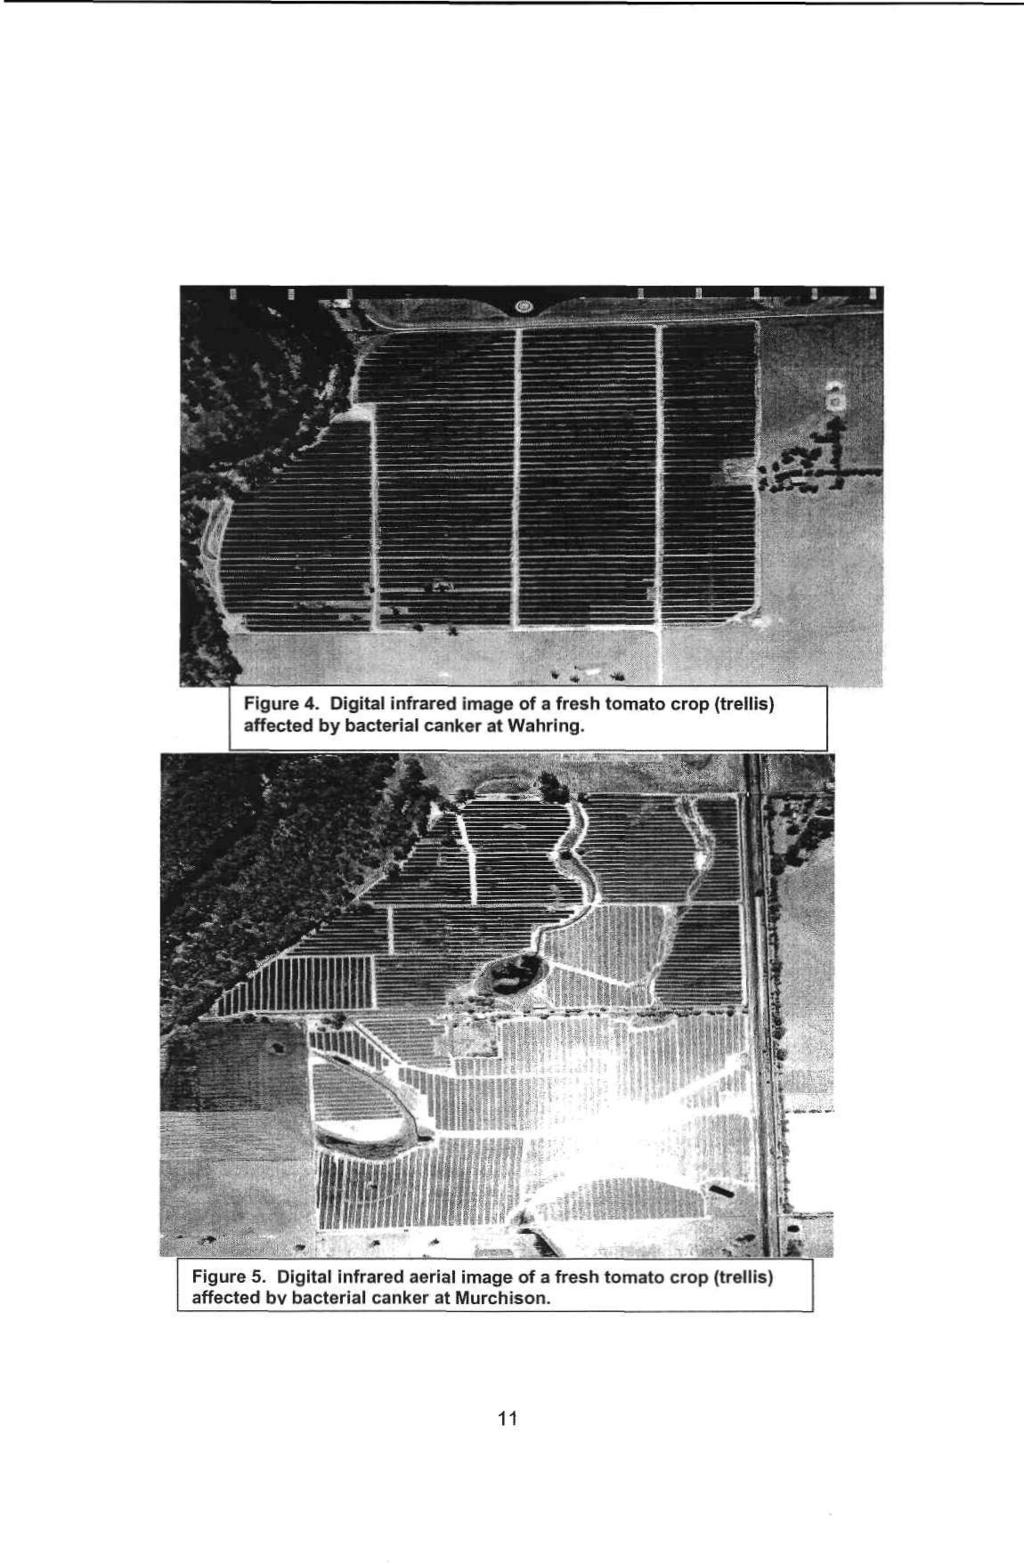 Figure 4. Digital infrared image of a fresh tomato crop (trellis) affected by bacterial canker at Wahring.